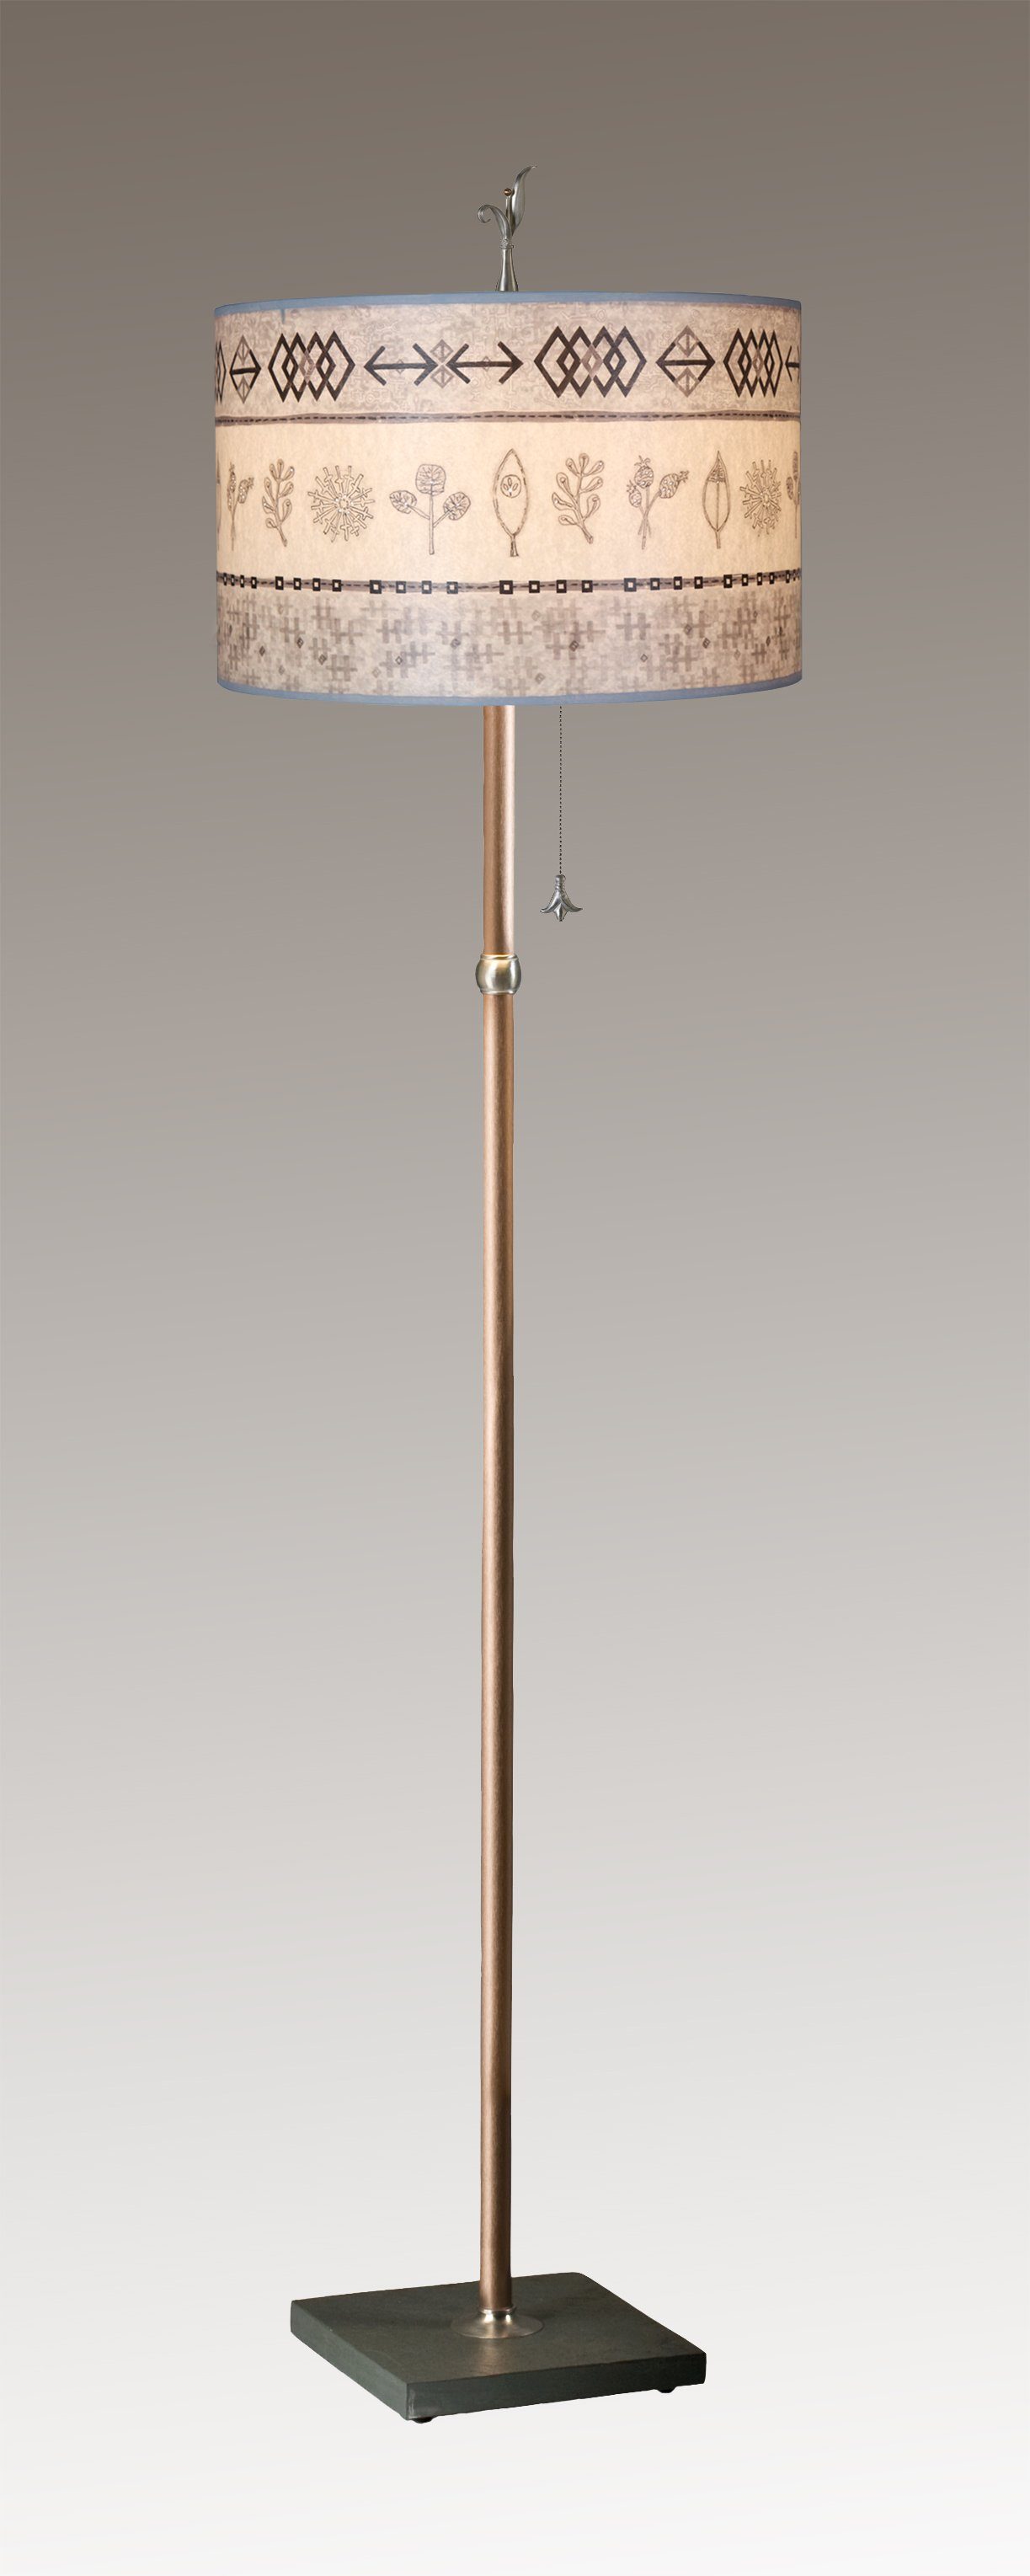 Janna Ugone & Co Floor Lamps Copper Floor Lamp with Large Drum Shade in Woven & Sprig in Mist